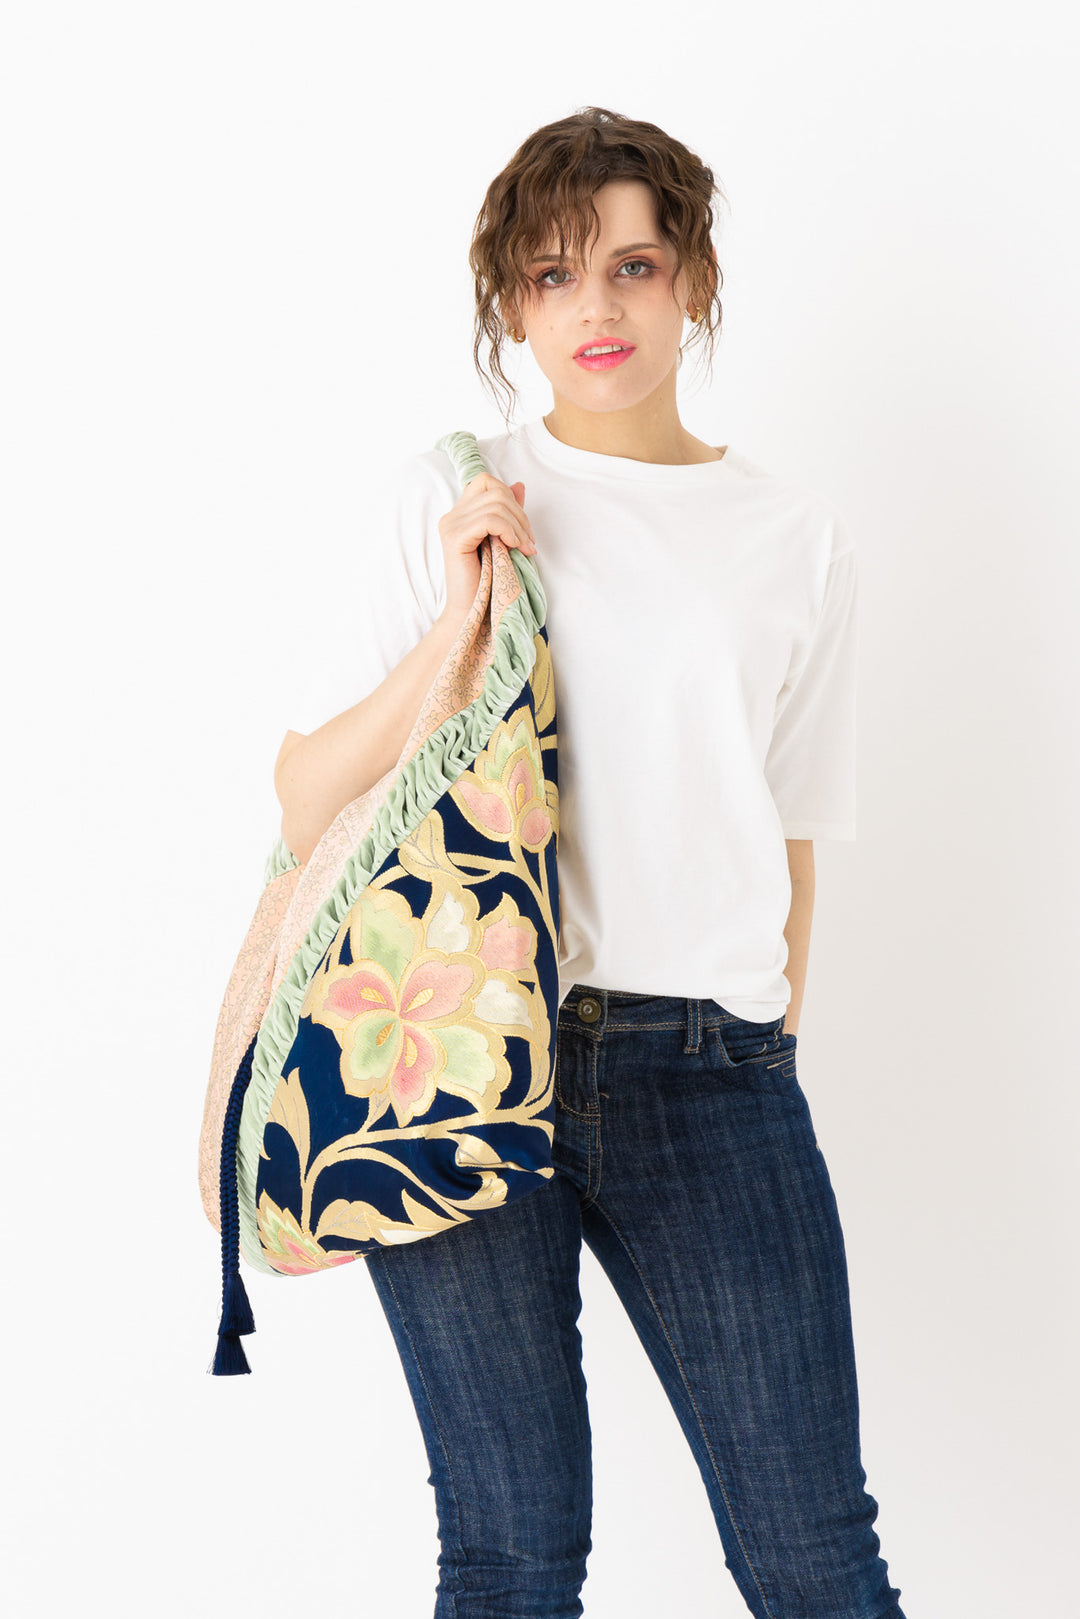 A woman is carrying a stunning embroidered boho bag, showcasing the intricate details on this large tote bag. This large boho bag elevates her style and is an example of embroidered tote bag styling.